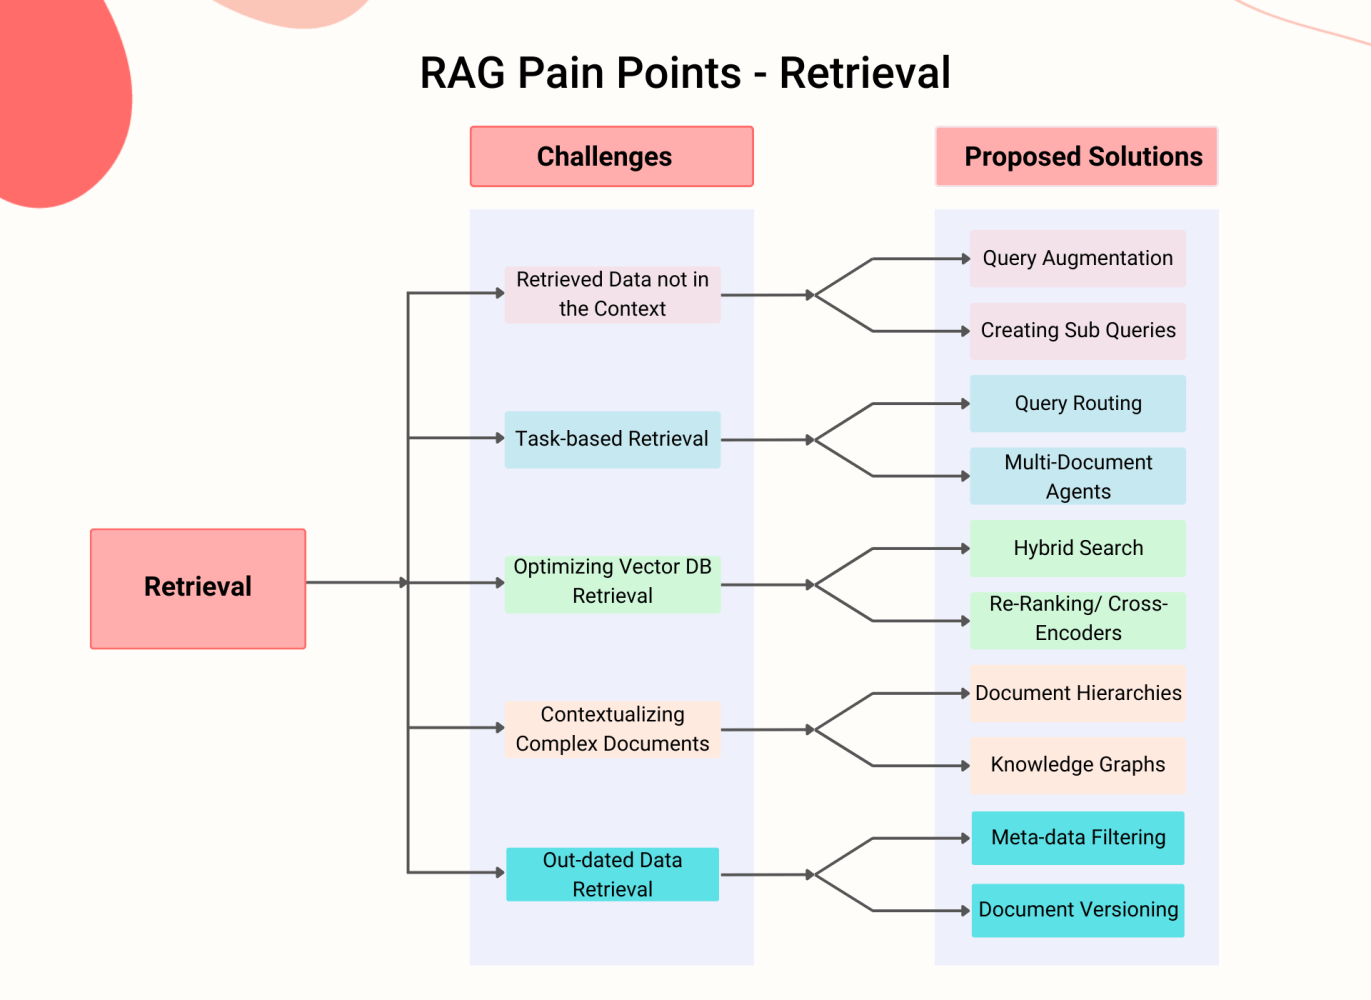 RAG Piepleine - Pain Points and Solutions in the Retrieval Stage